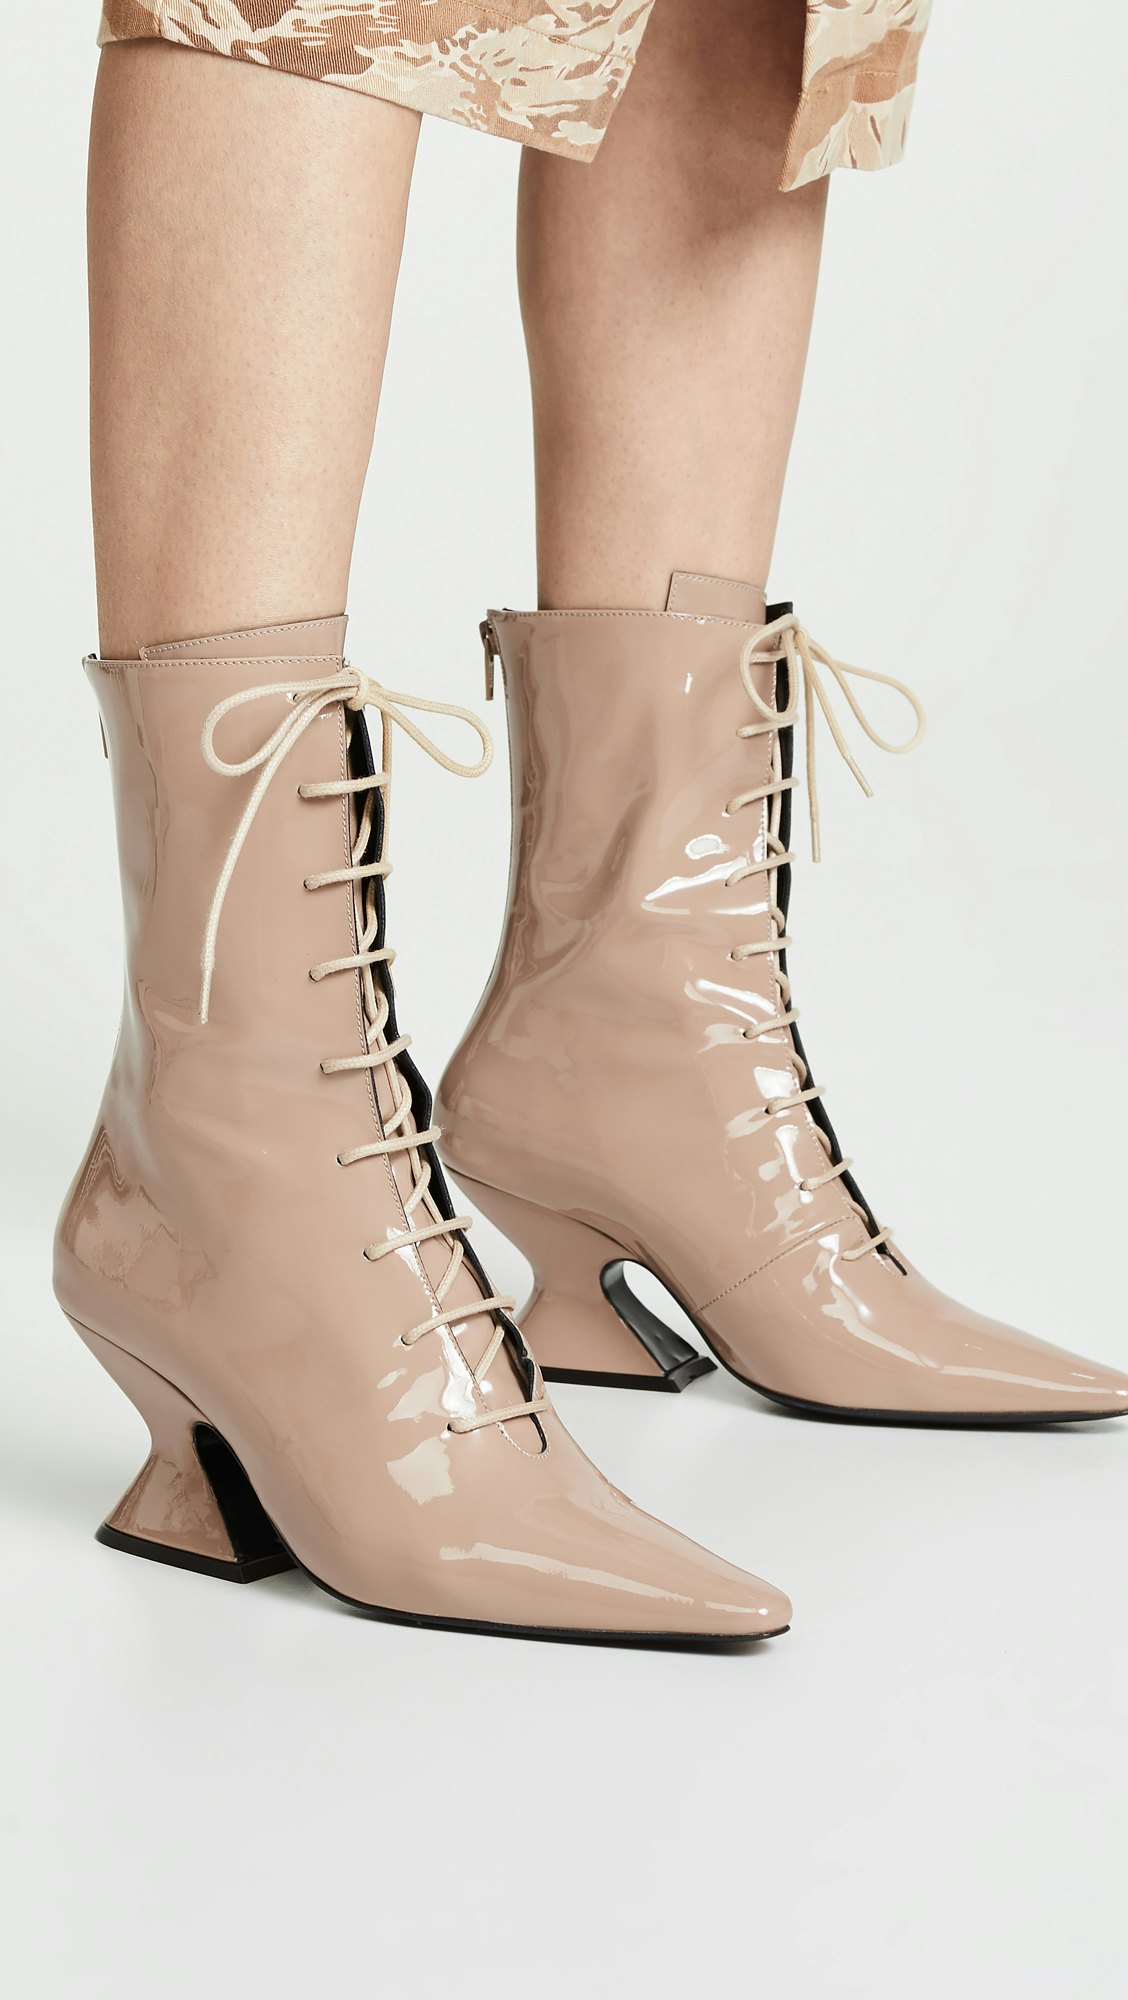 Victorian Ankle Boots Are Every Fashion 